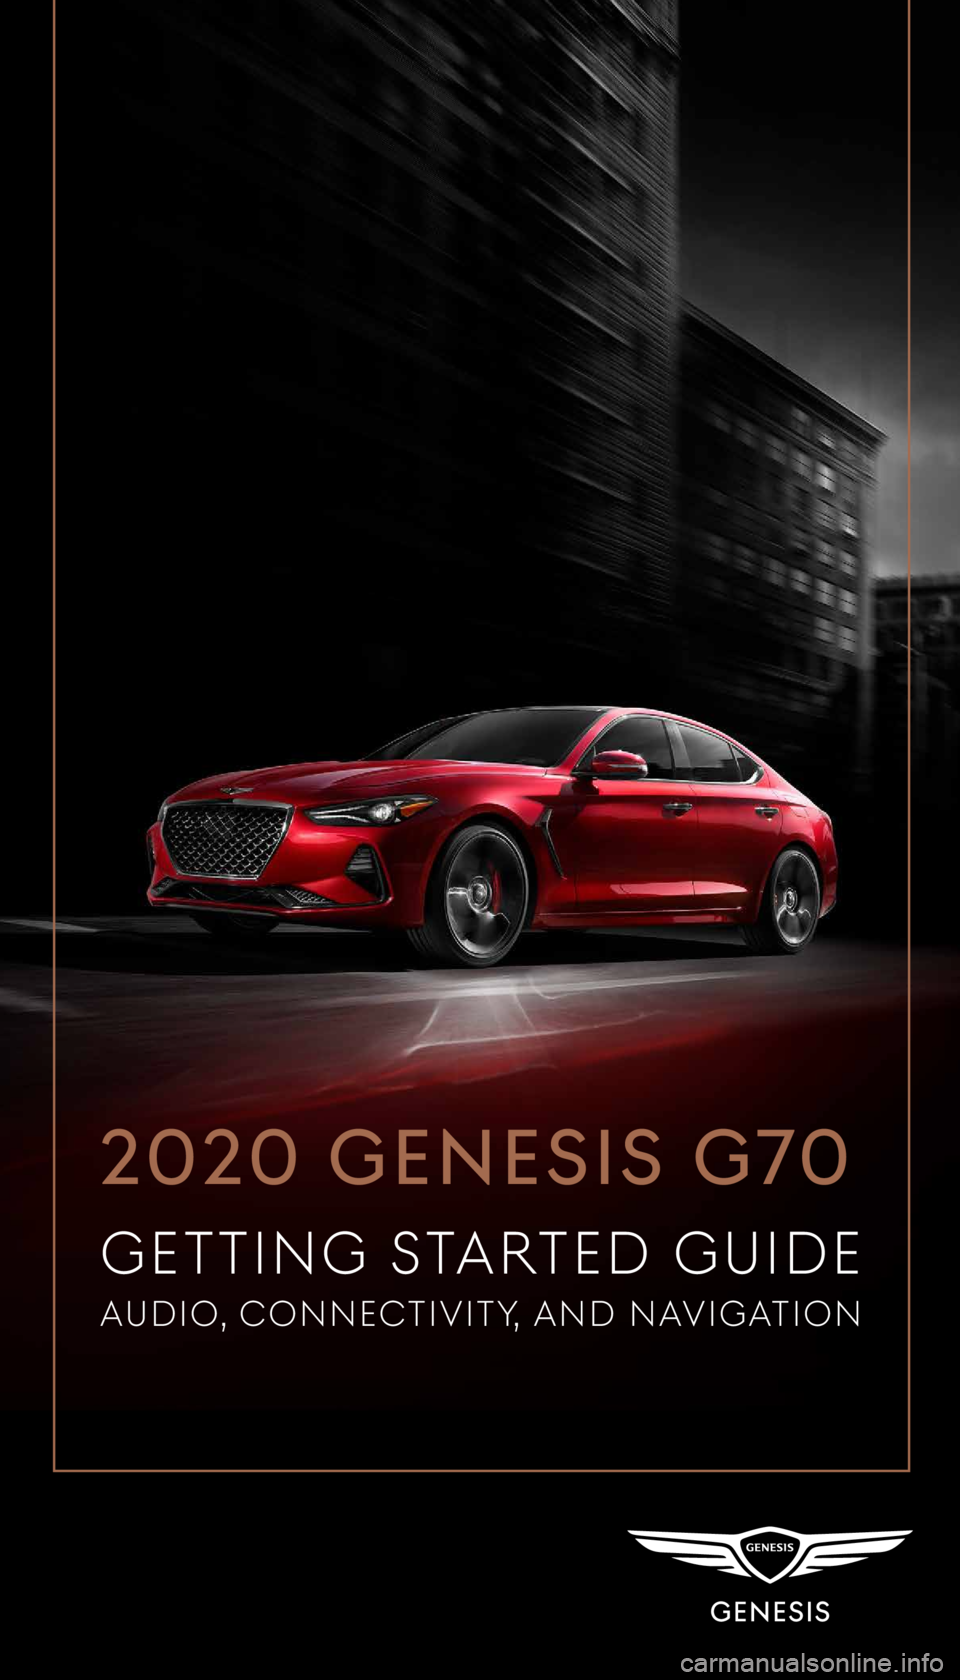 GENESIS G70 2020  Getting Started Guide GETTING STARTED GUIDE 
2020 GENESIS G70
ACTIVITY AND NA VIGATION  